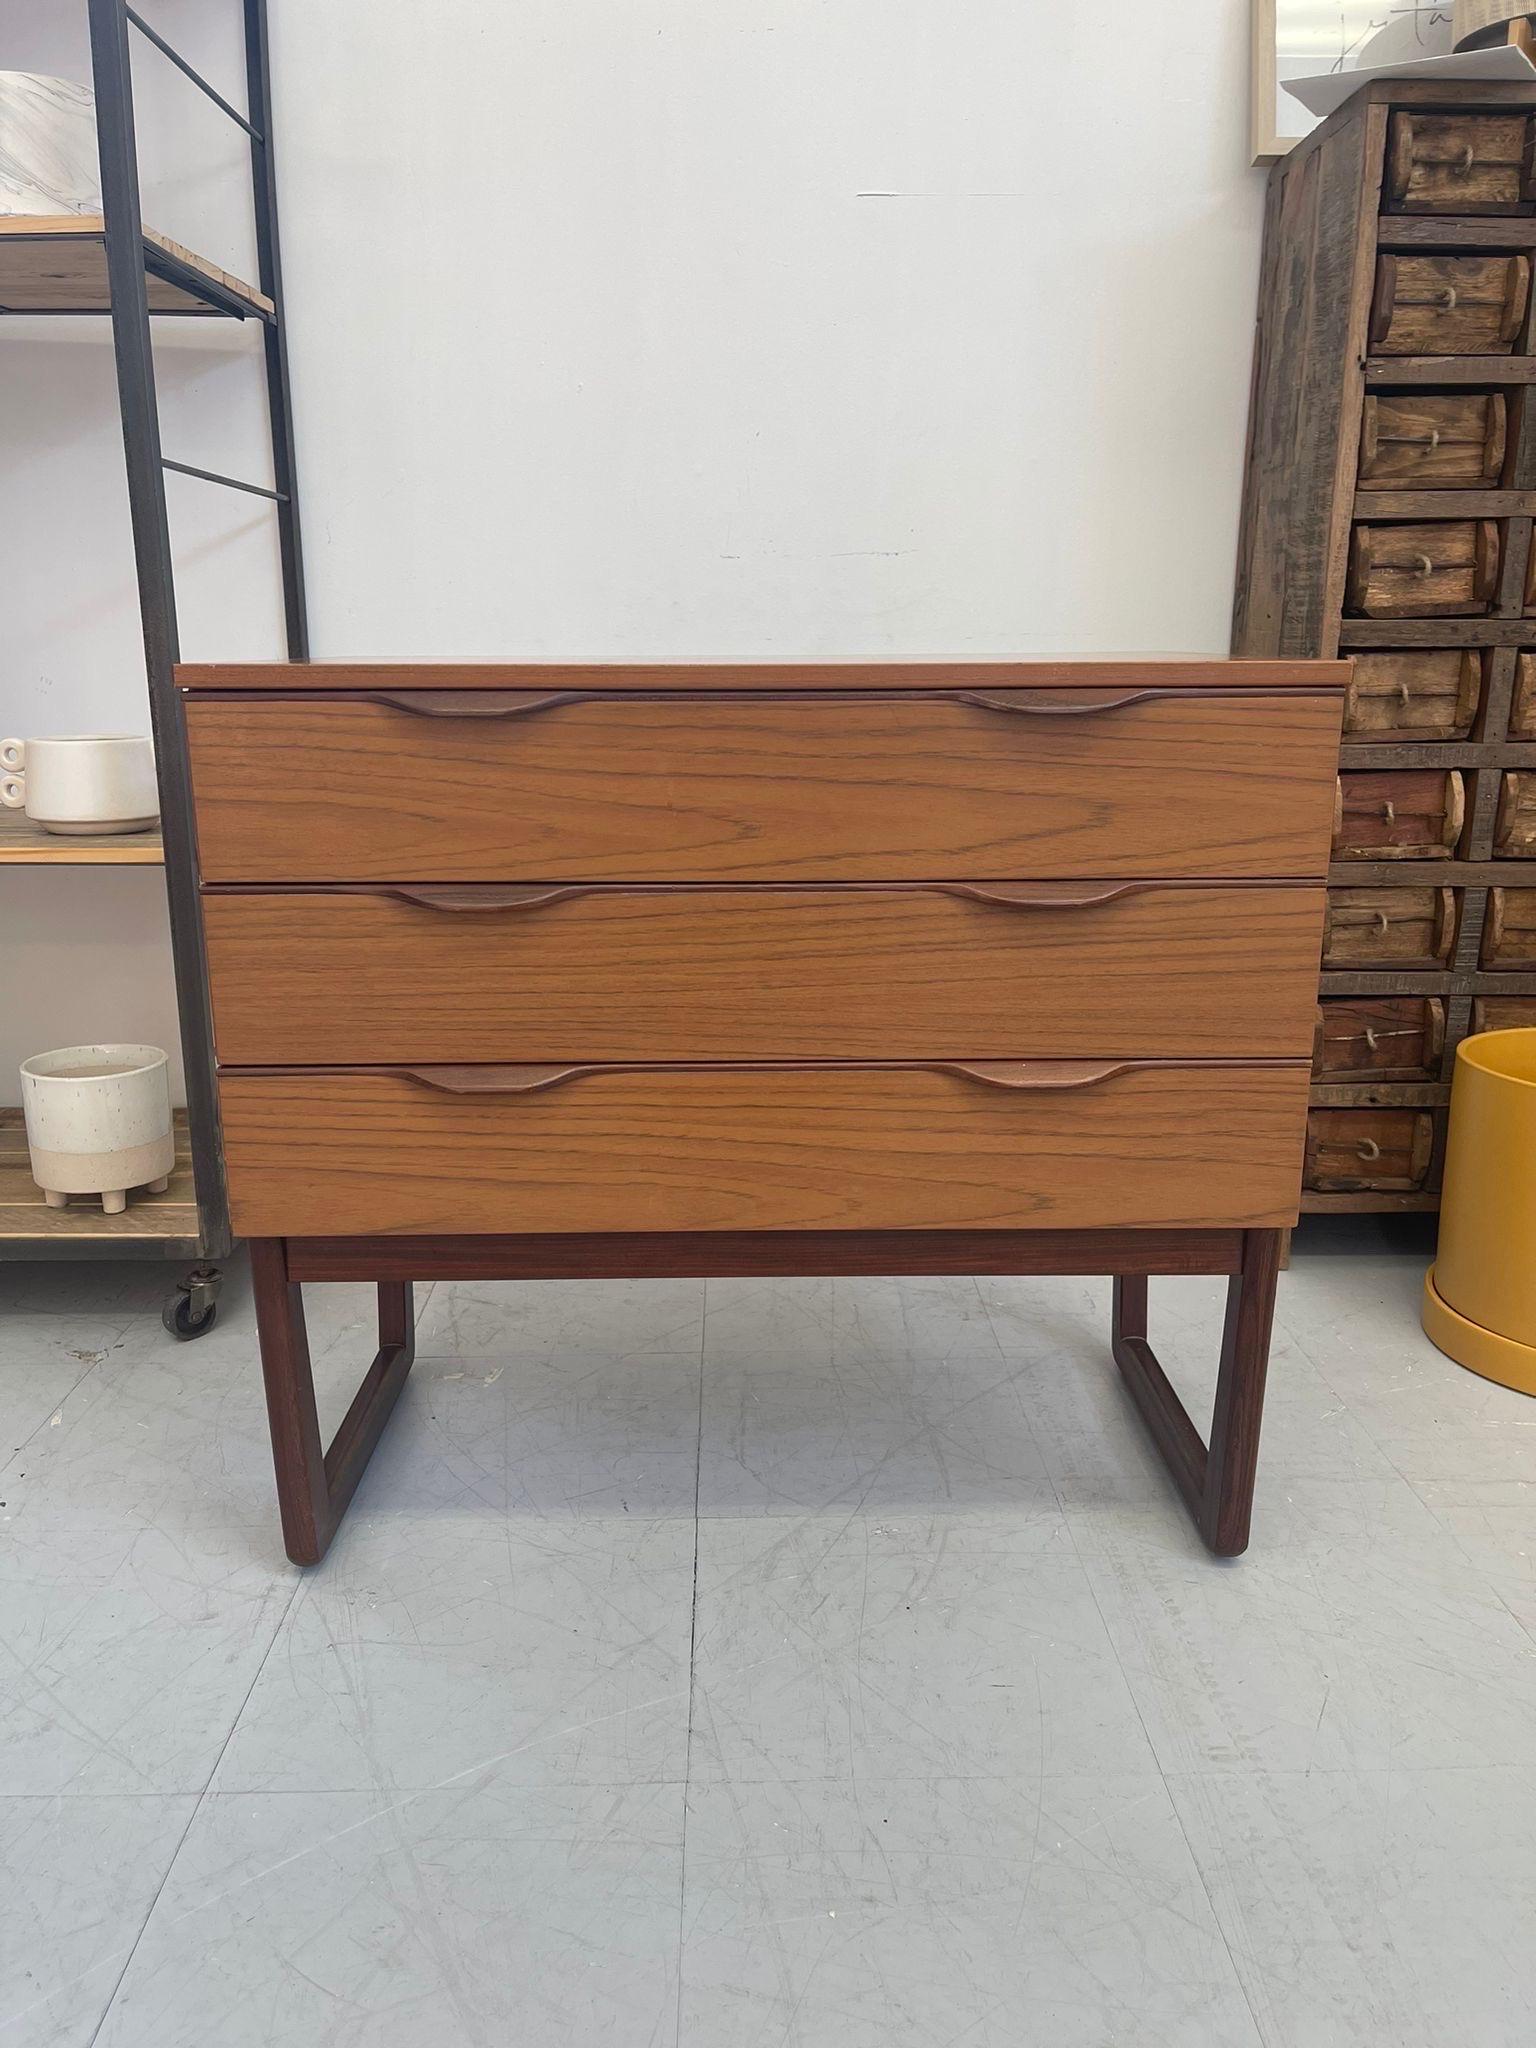 Danish Modern Dresser with 3 Drawers. G Plan Style. Retro Construction with Unique Drawer Handles.Finished Back.

Dimensions. 29 1/2 W ; 18 D ; 27 1/2H